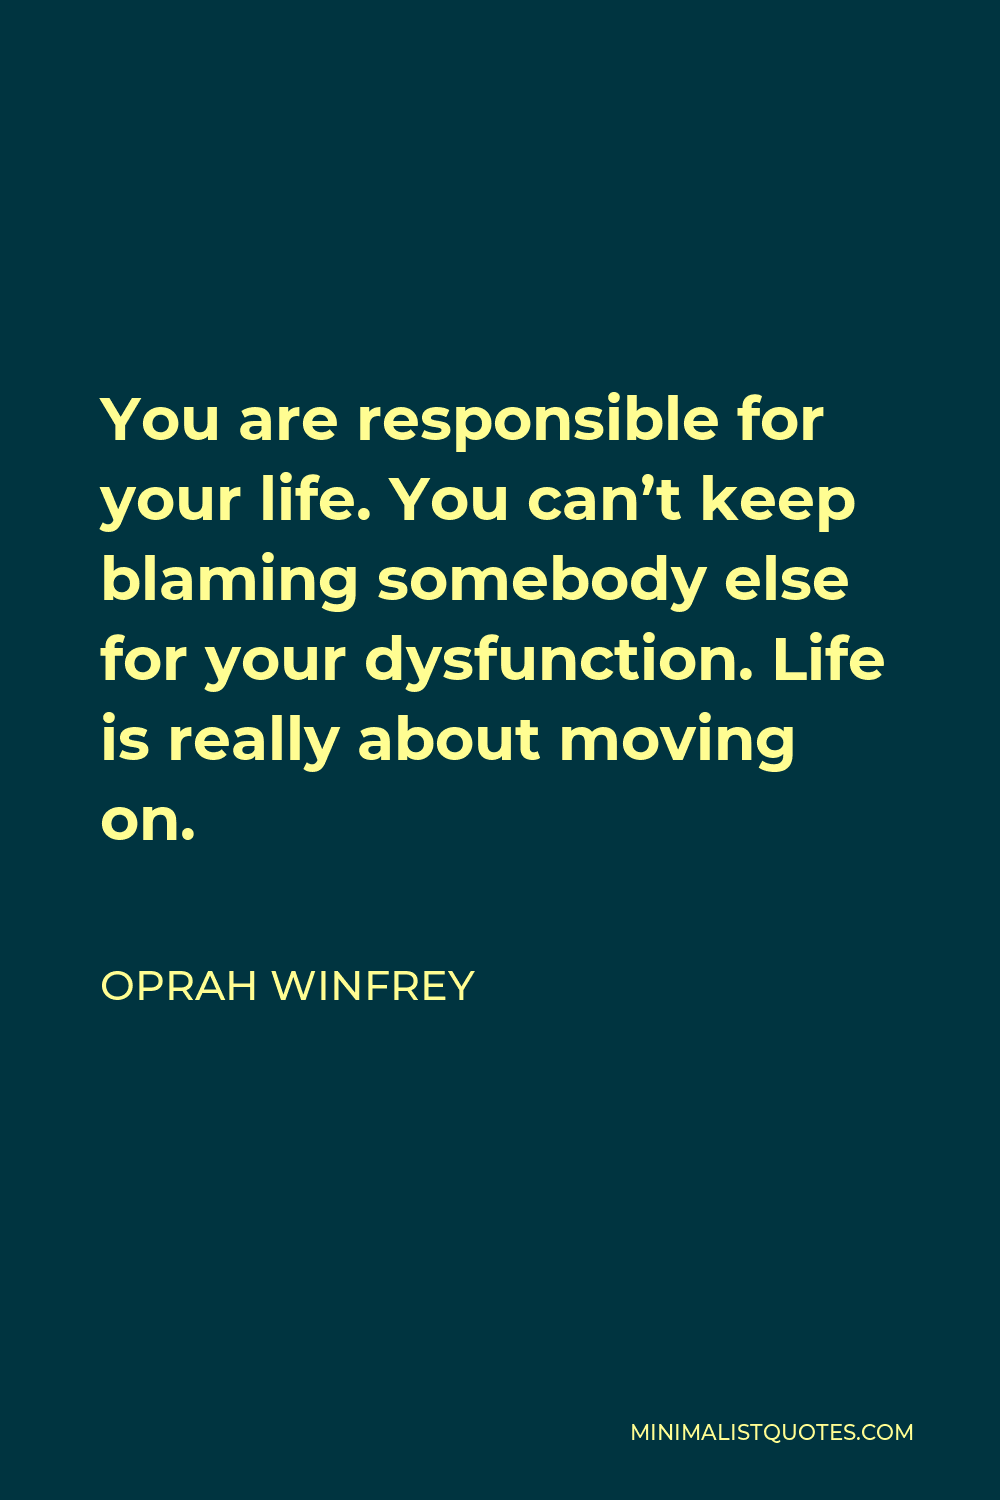 Oprah Winfrey Quote - You are responsible for your life. You can’t keep blaming somebody else for your dysfunction. Life is really about moving on.